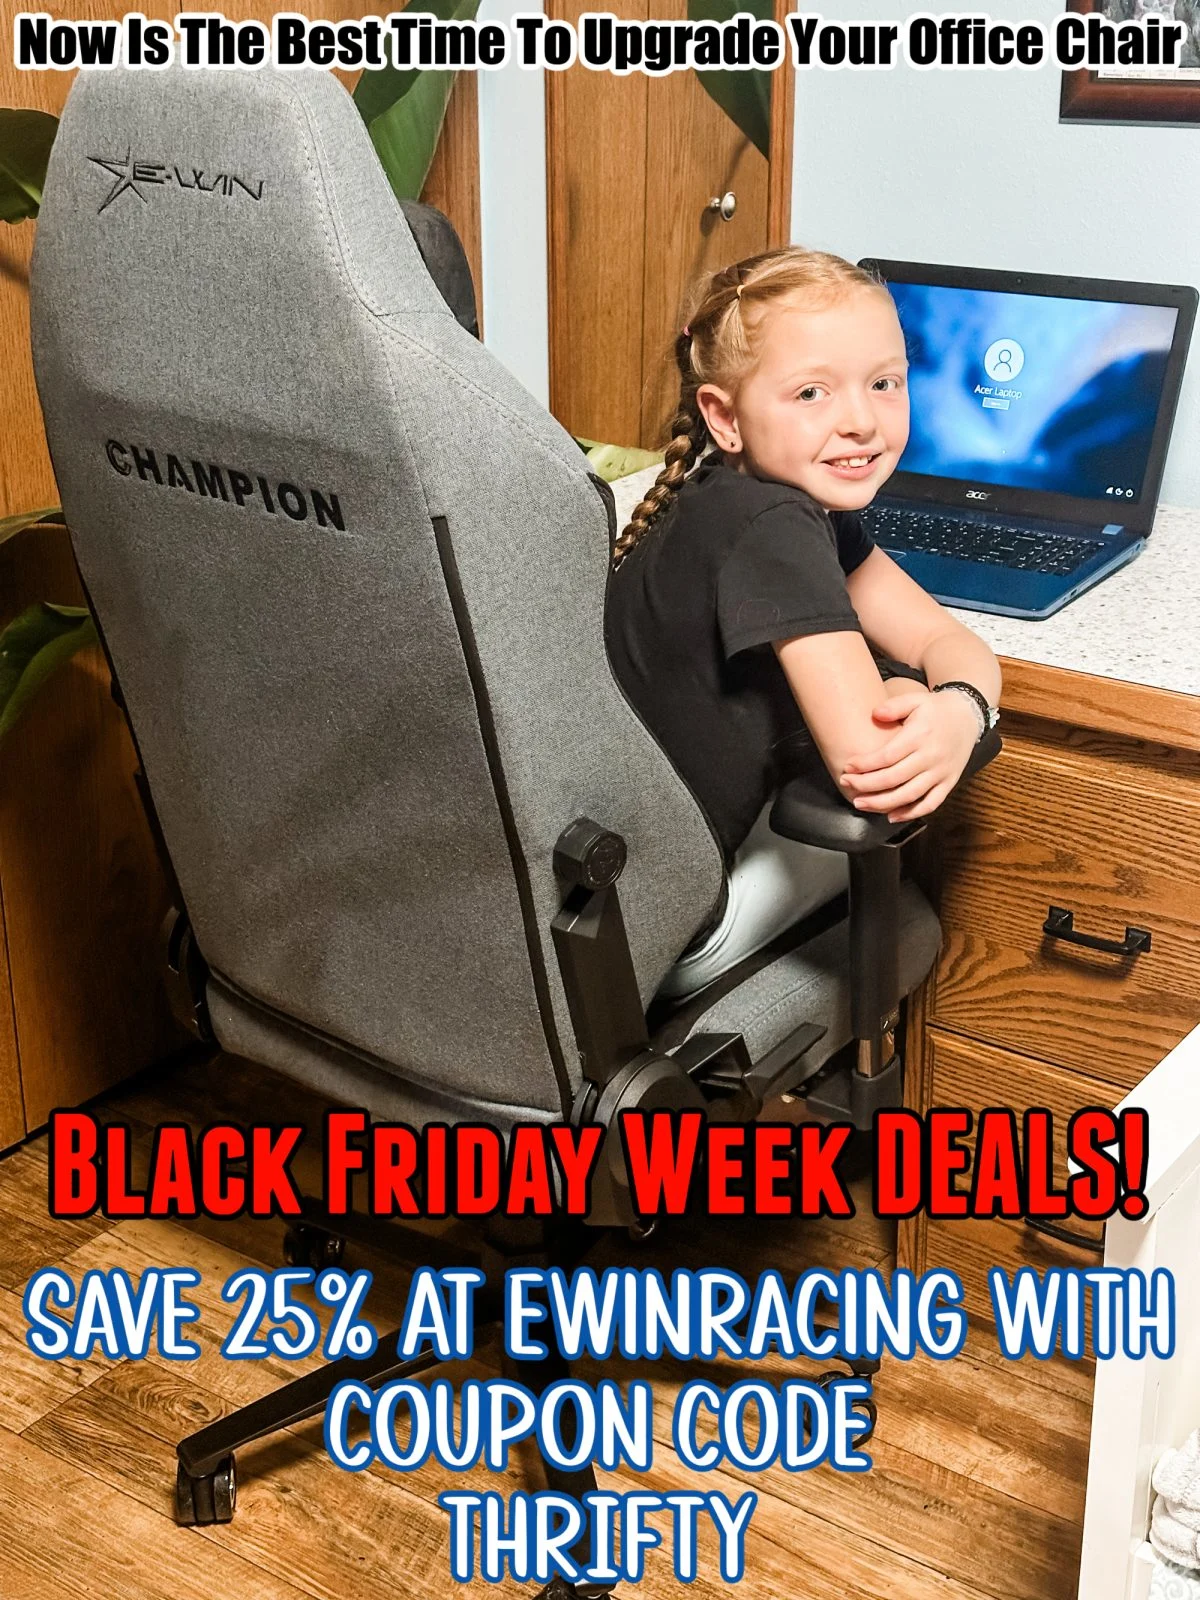 Now Is The Best Time To Upgrade Your Office Chair | Save 25% At EwinRacing With Code